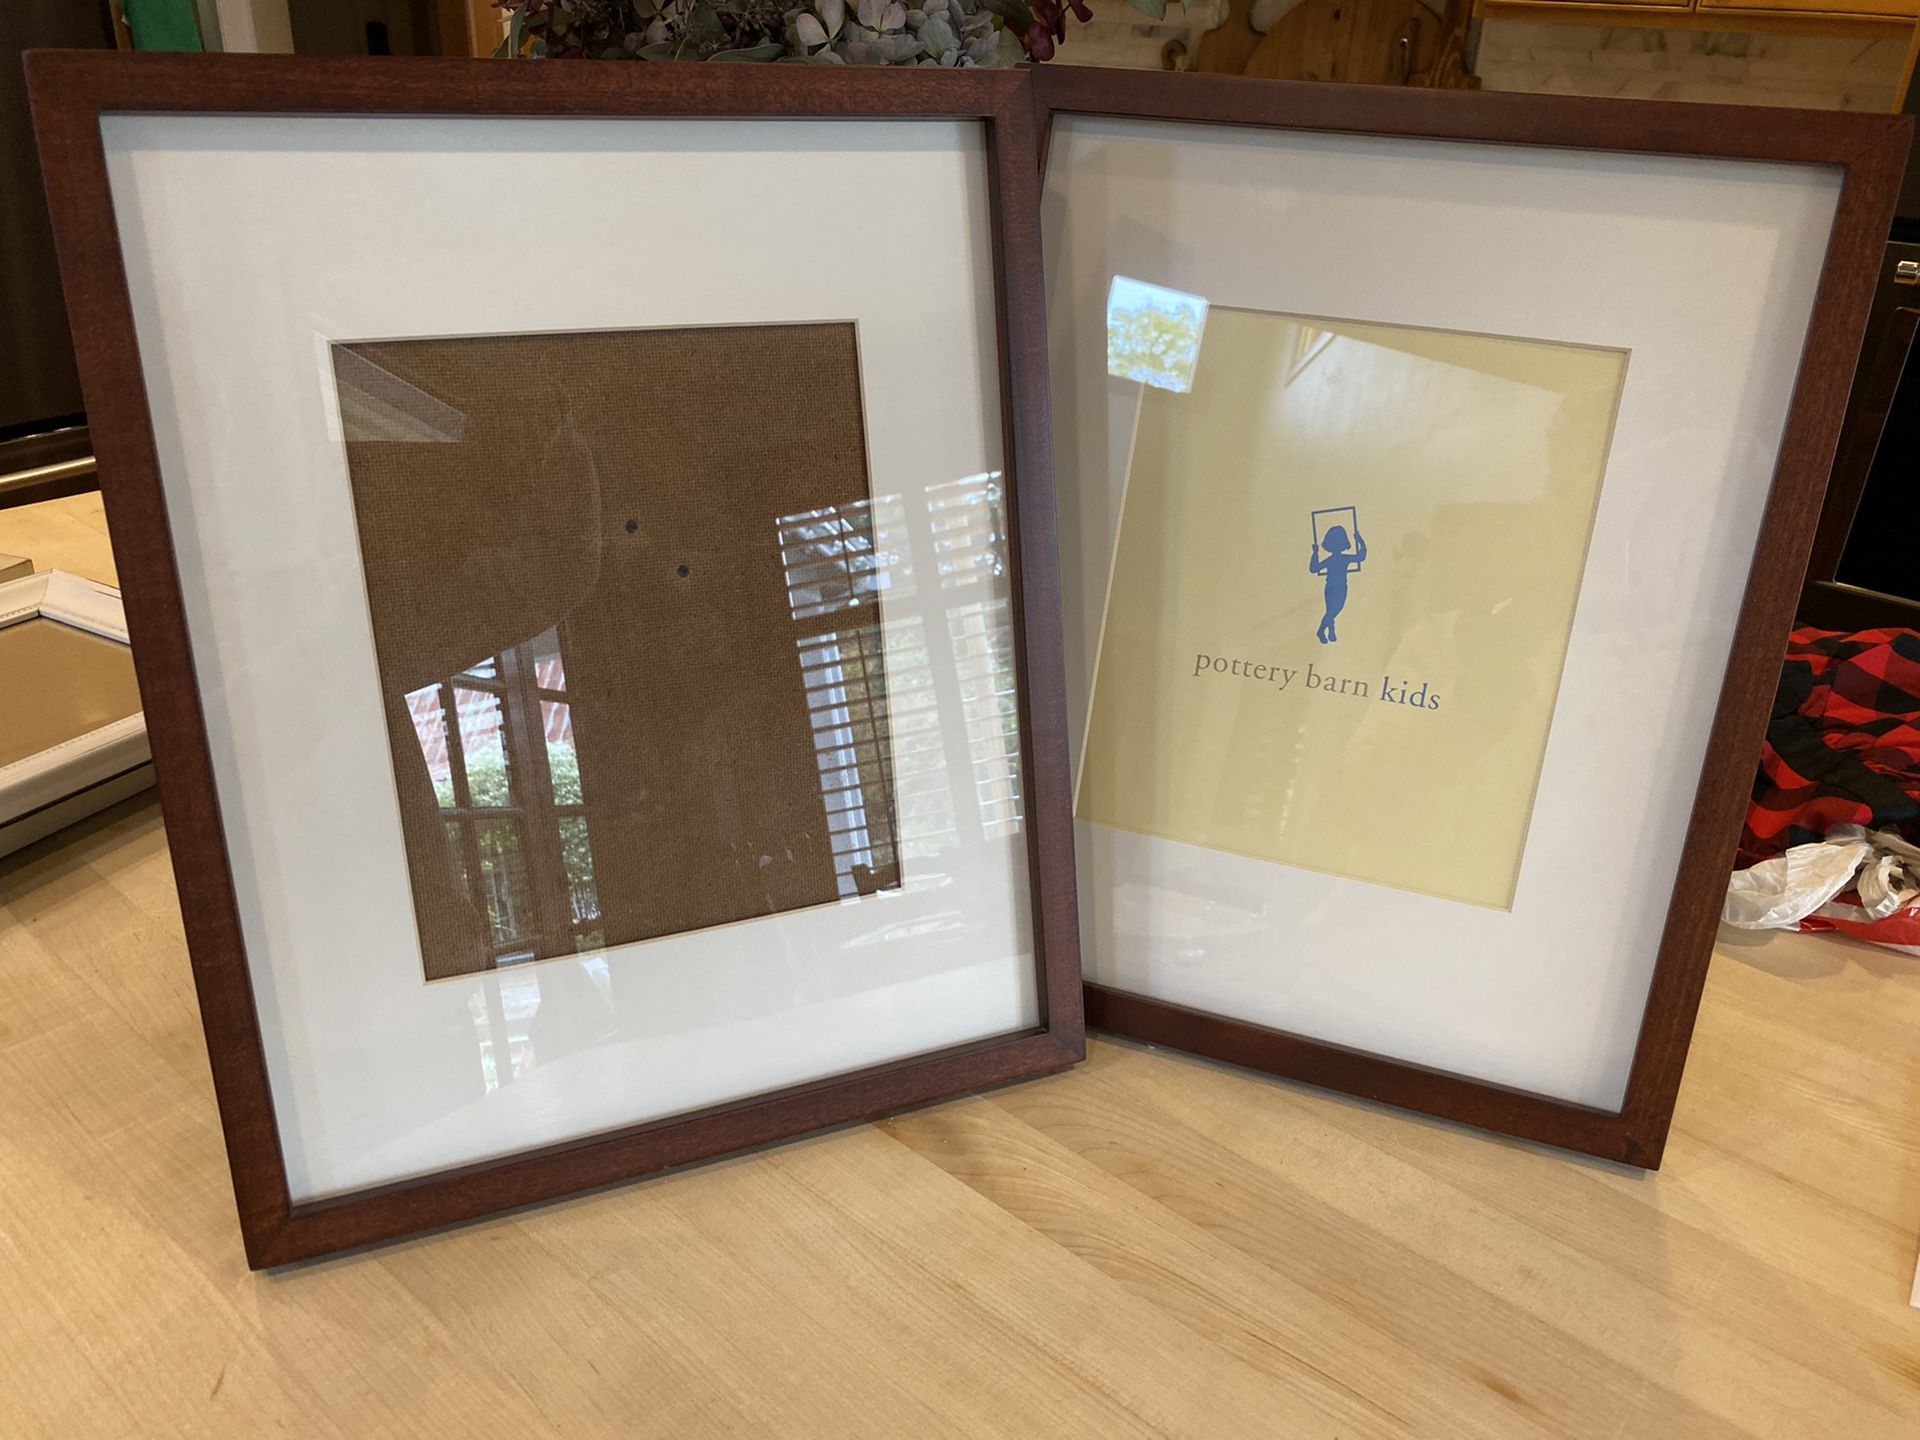 Set of two Pottery barn kids frame with Matt picture opening is for an 8 x 10 photo